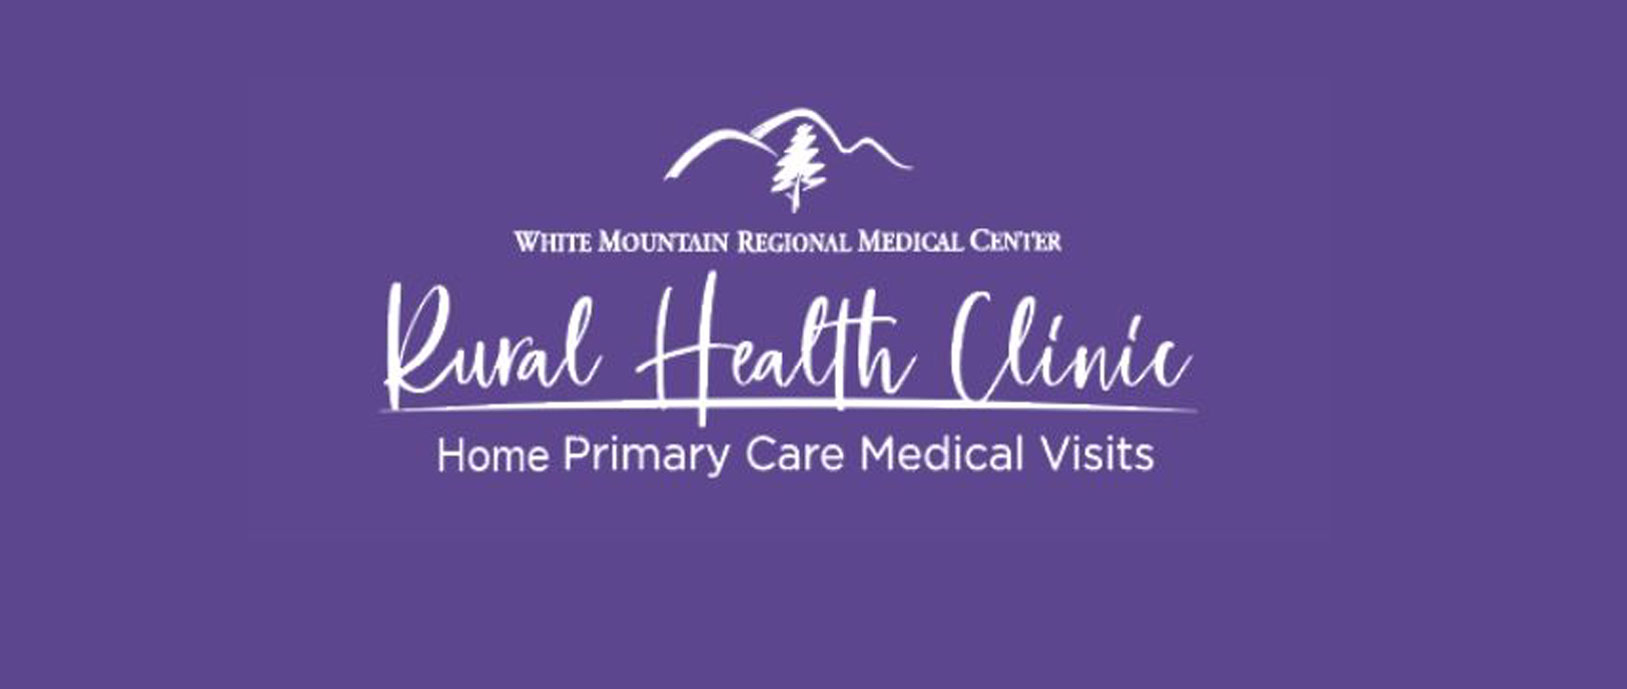 Banner of White Mountain Regional Medical Center logo (mountains and a tree). Banner says:

WHITE MOUNTAIN REGIONAL MEDICAL CENTER
RURAL HEALTH CLINIC
Home Primary Care Medical Visits